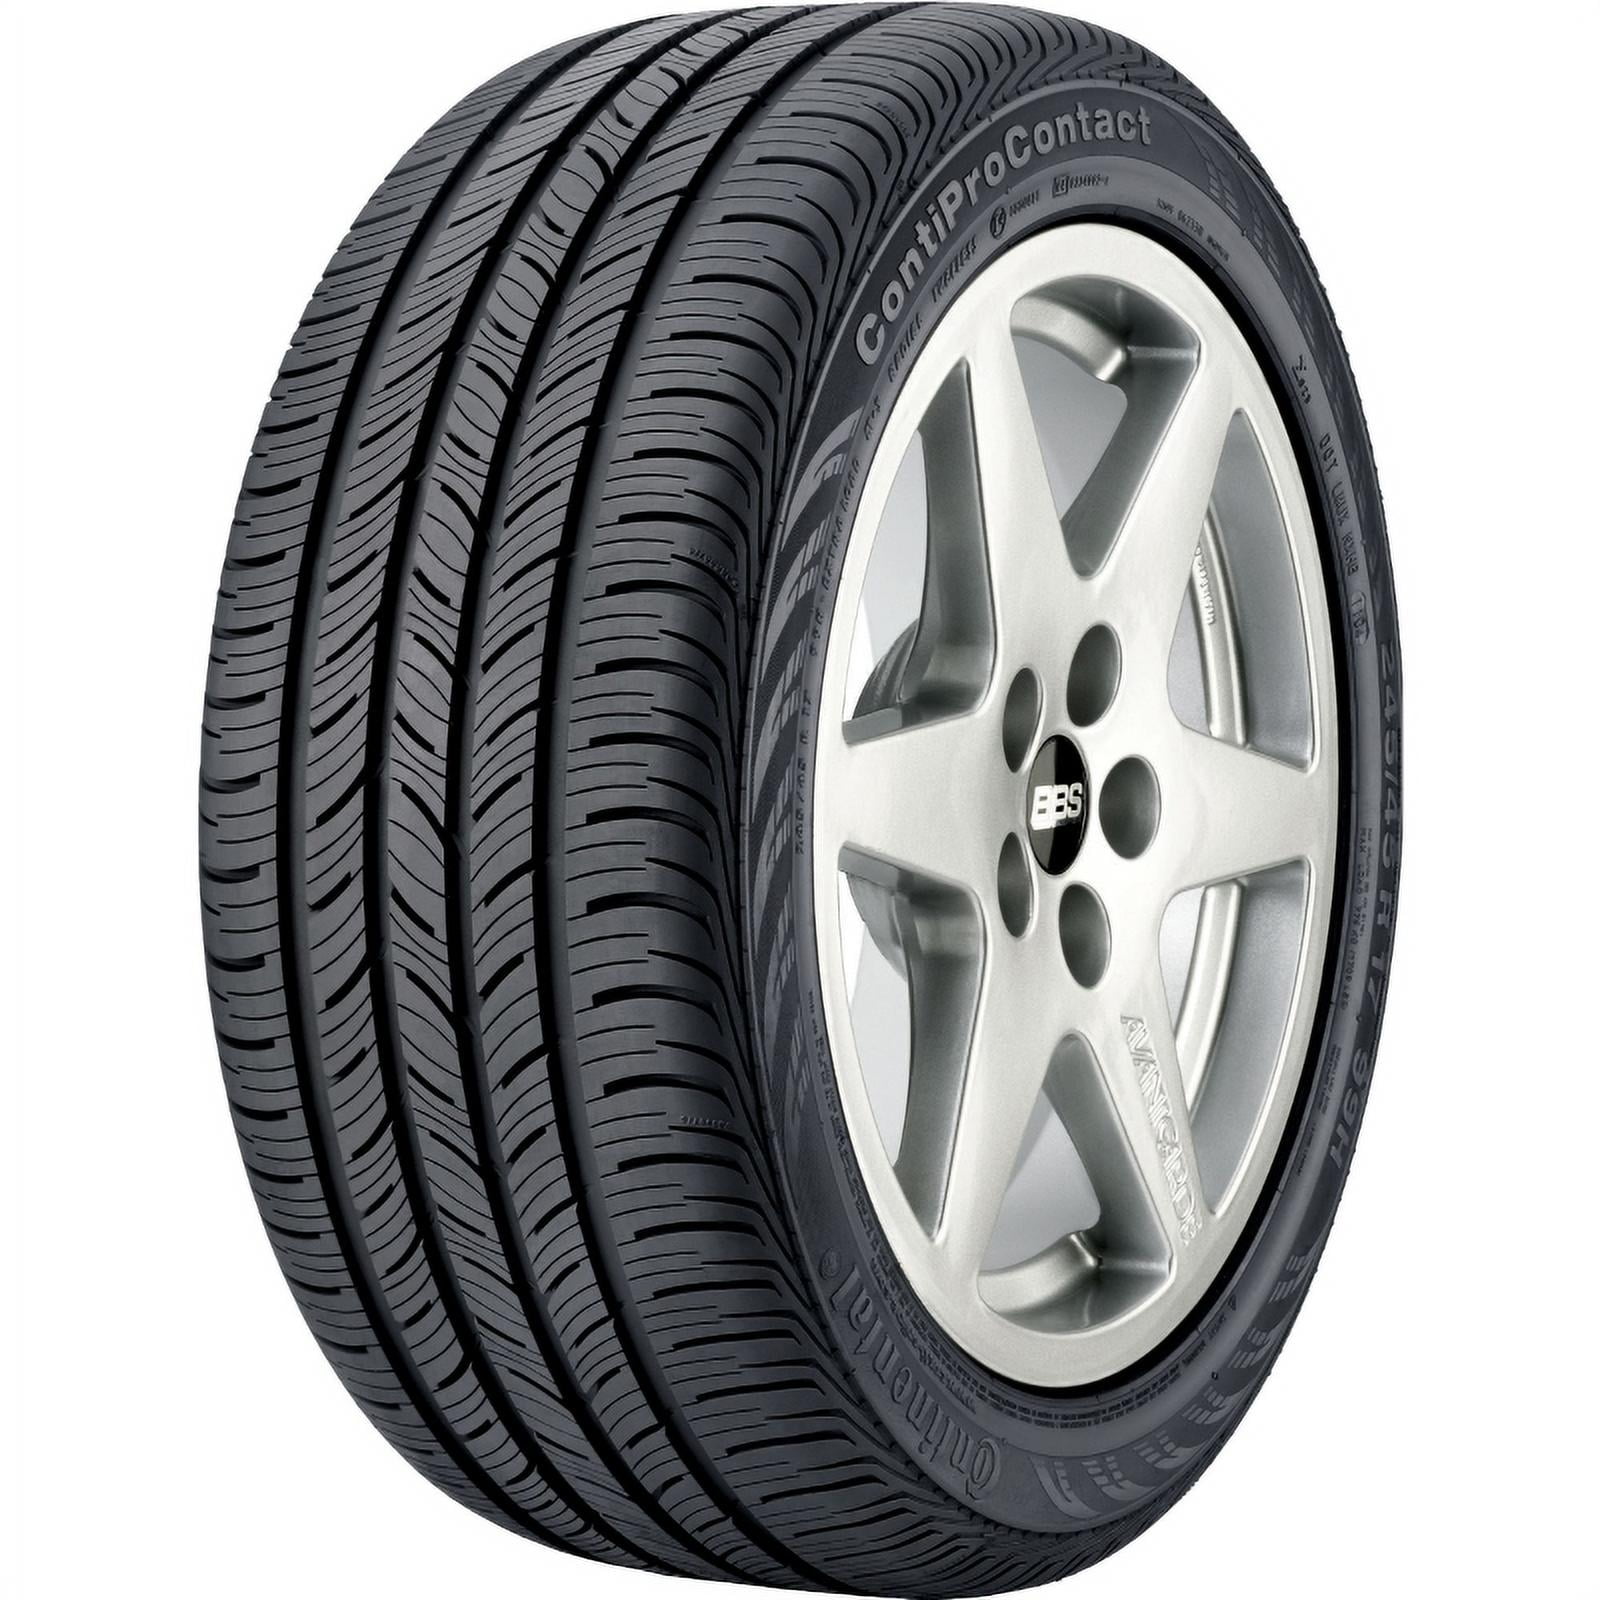 102 H 235/60 R 17 CONTINENTAL CROSS WINTER CONTACT M&S 